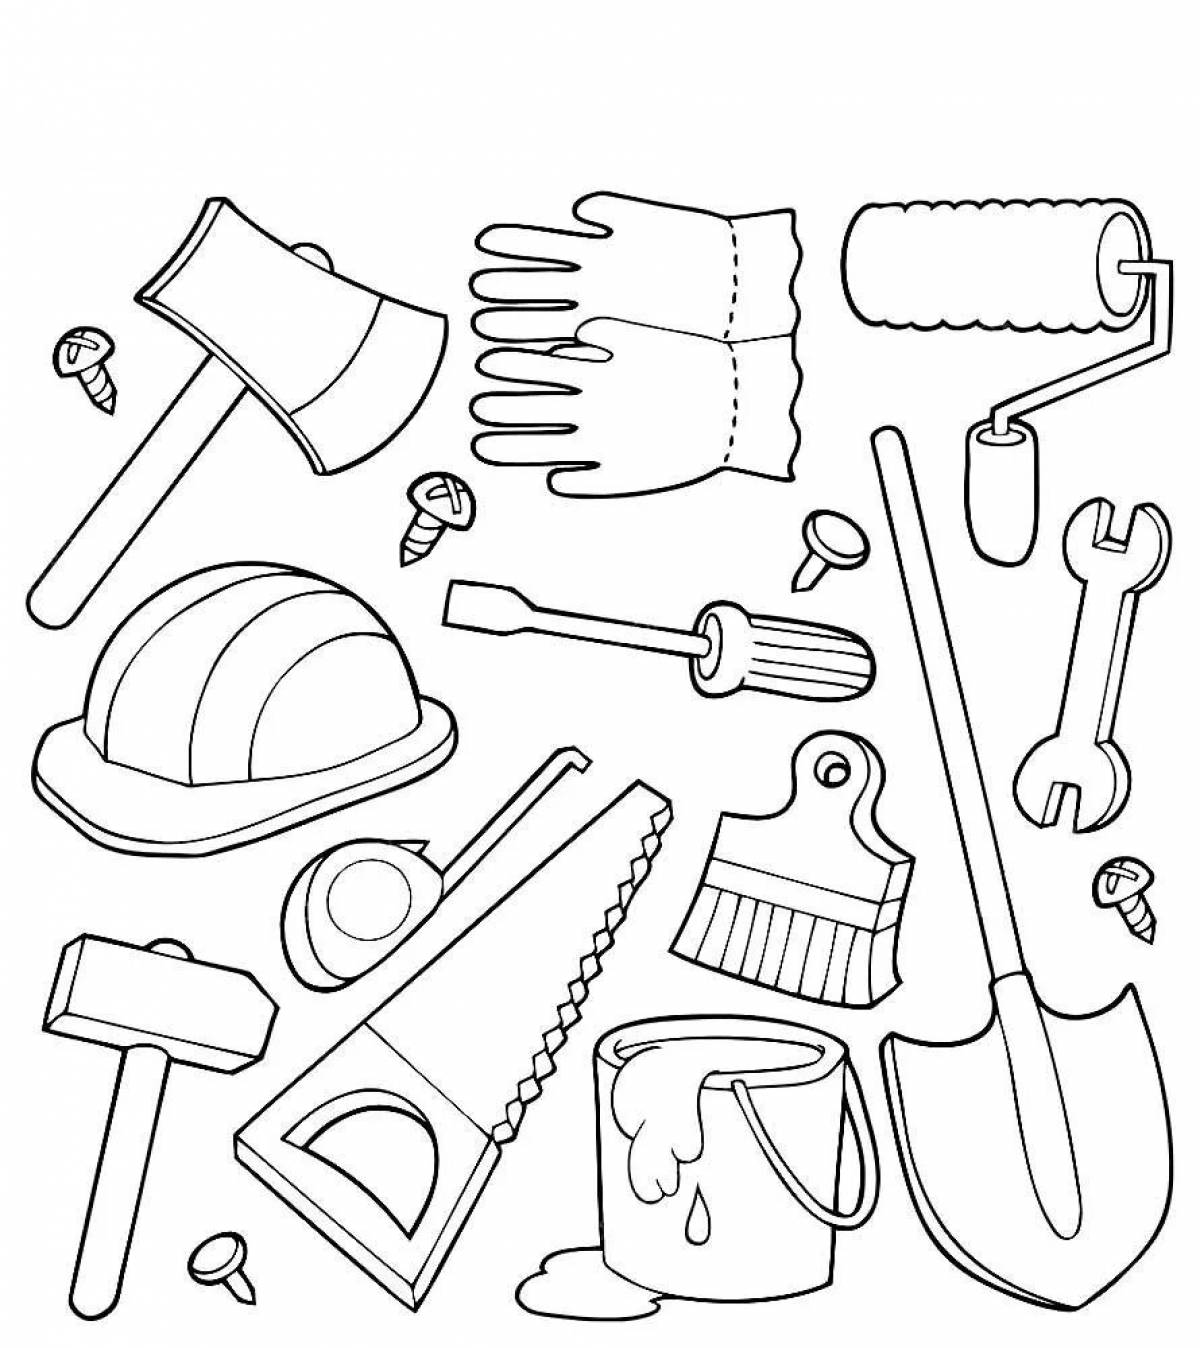 Professions and tools #7